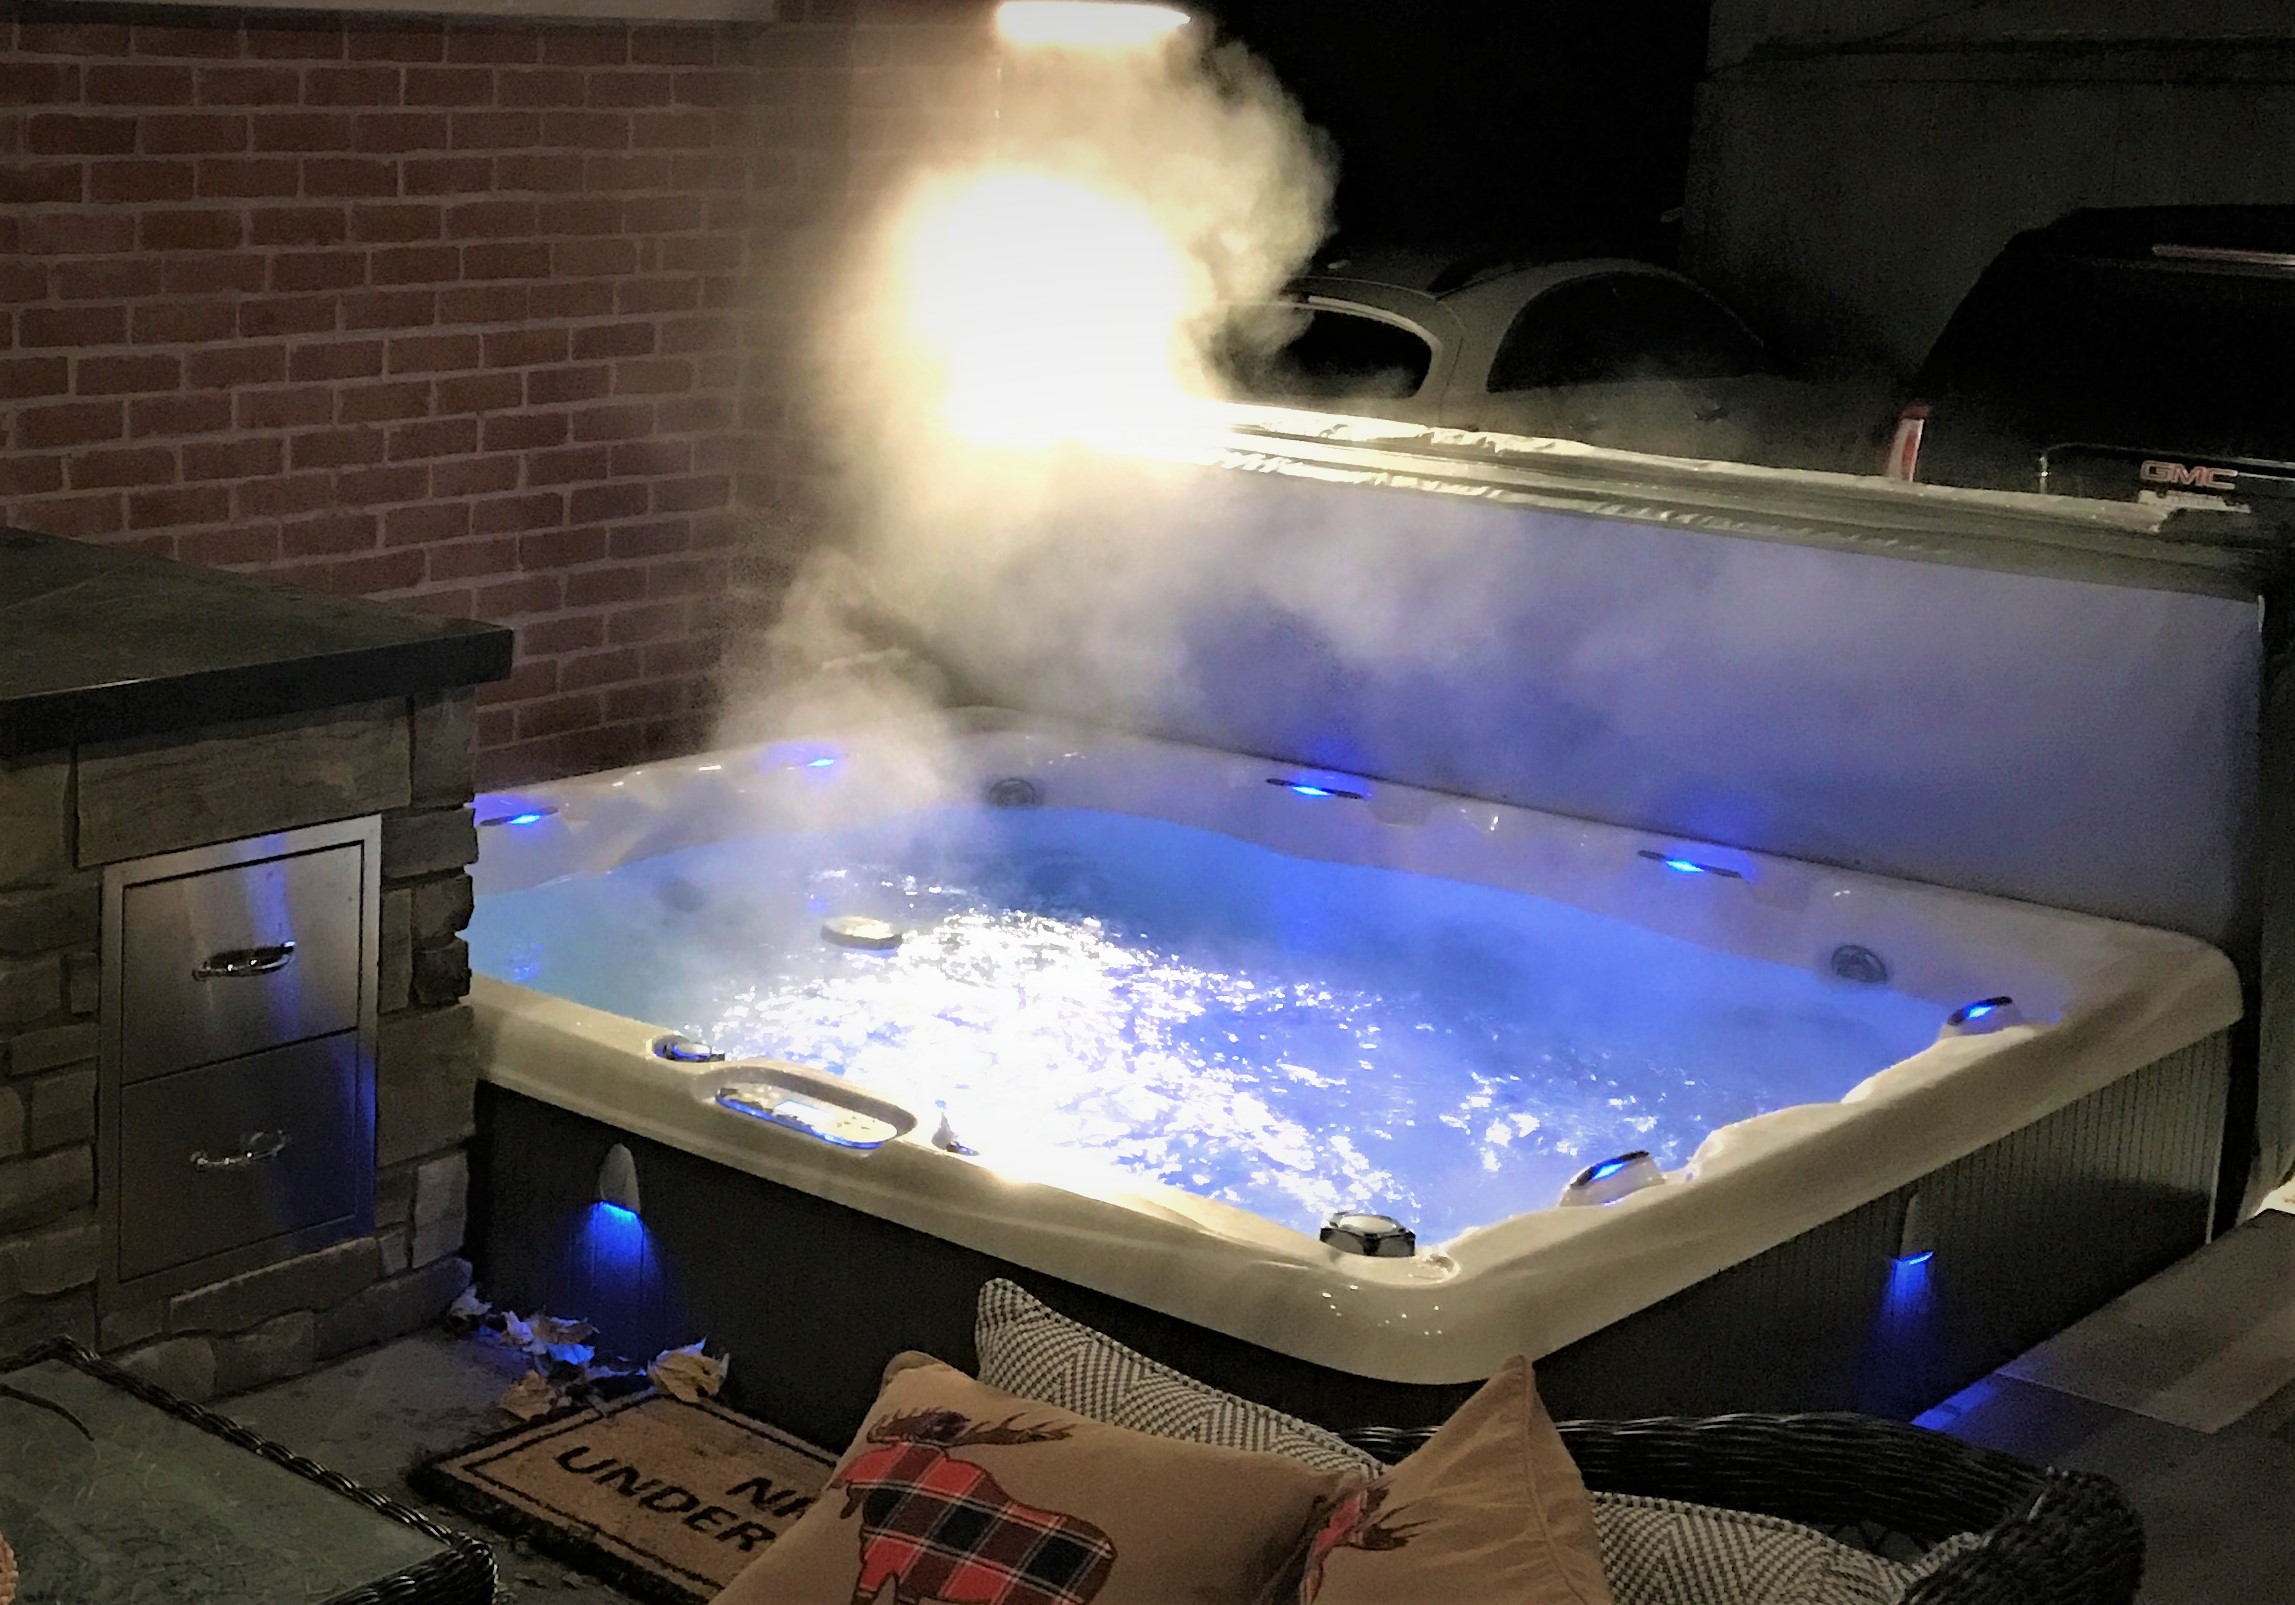 How Hot Should Your Hot Tub Be?